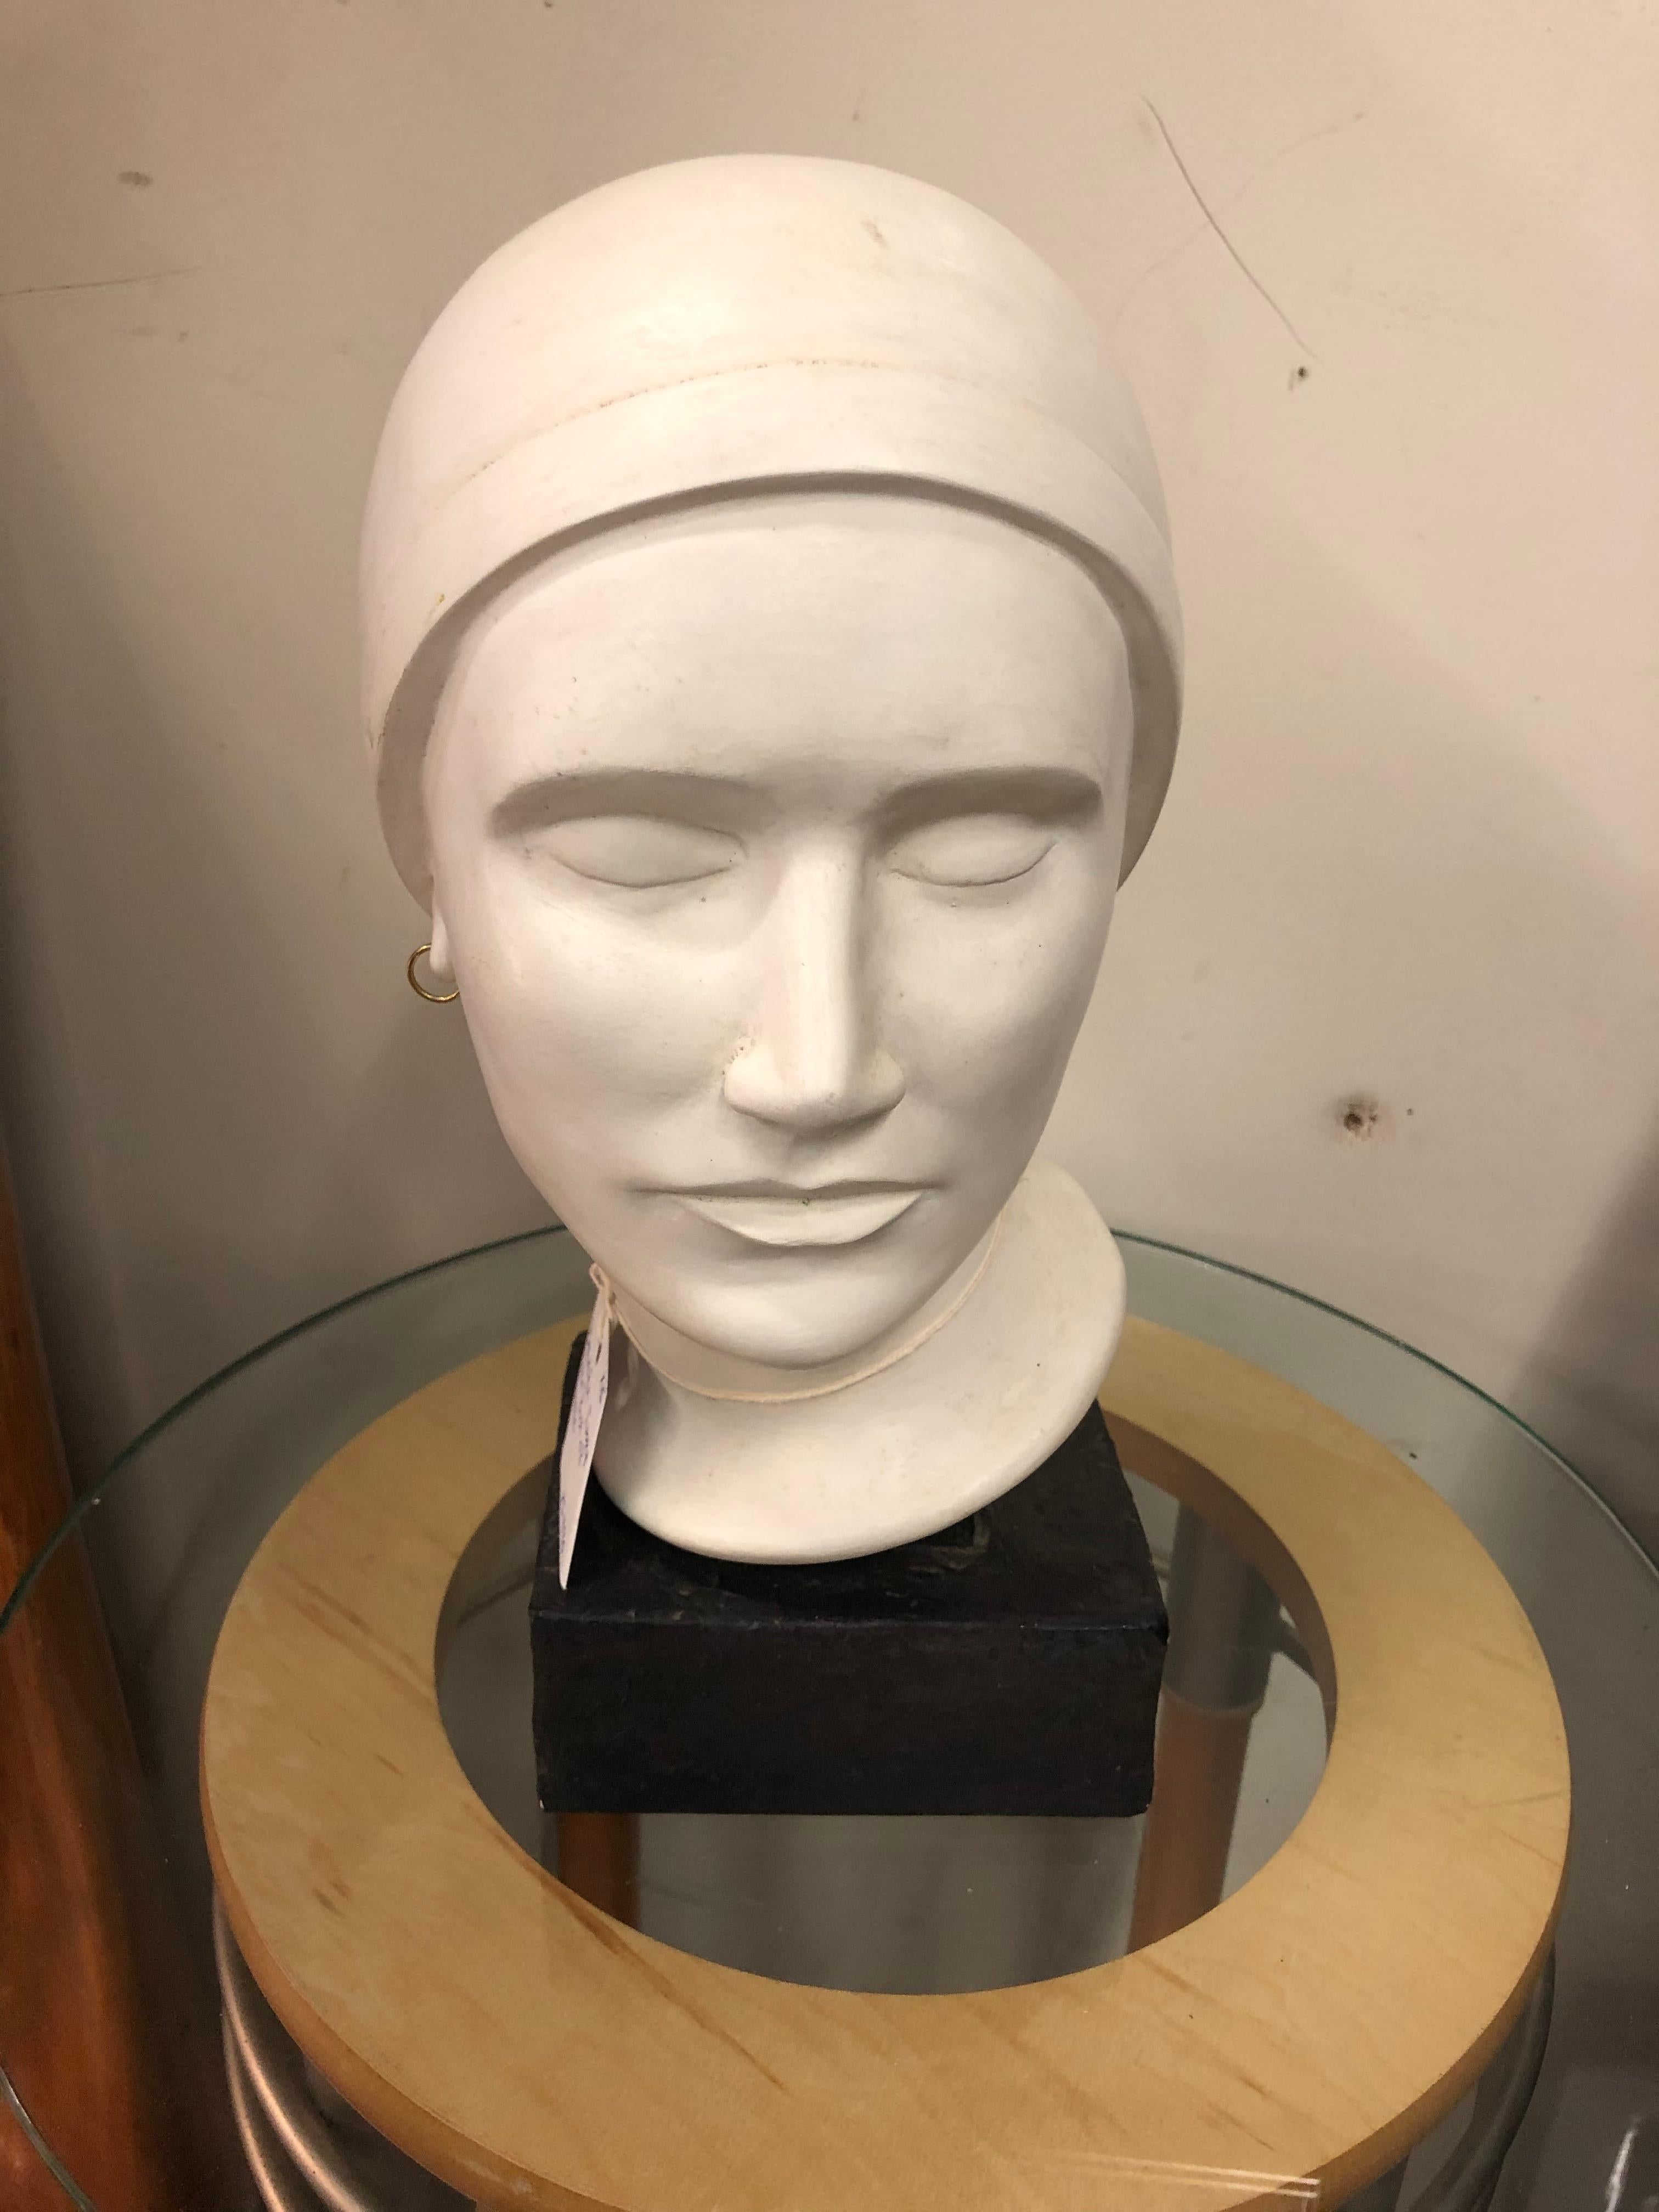 A beautiful plaster bust of a woman mounted on a plaster base. Made in the Art Deco style, the woman is wearing a close fitting hat and one earring; her eyes are cast downwards. The bust has a felt bottom which is signed 